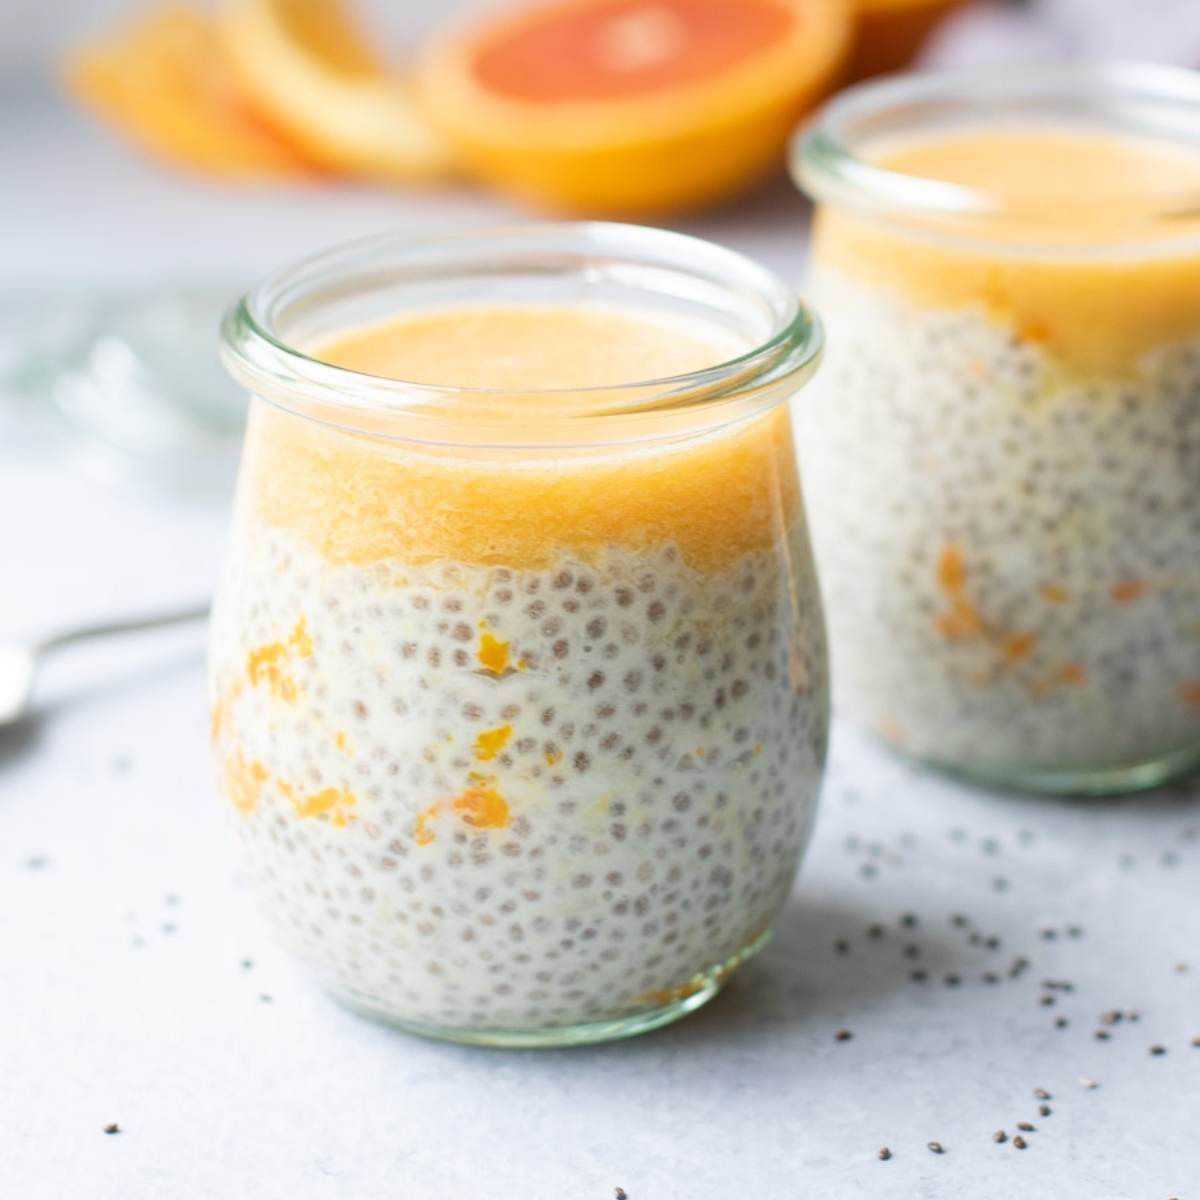 Creamsicle chia pudding in jars with oranges in background.